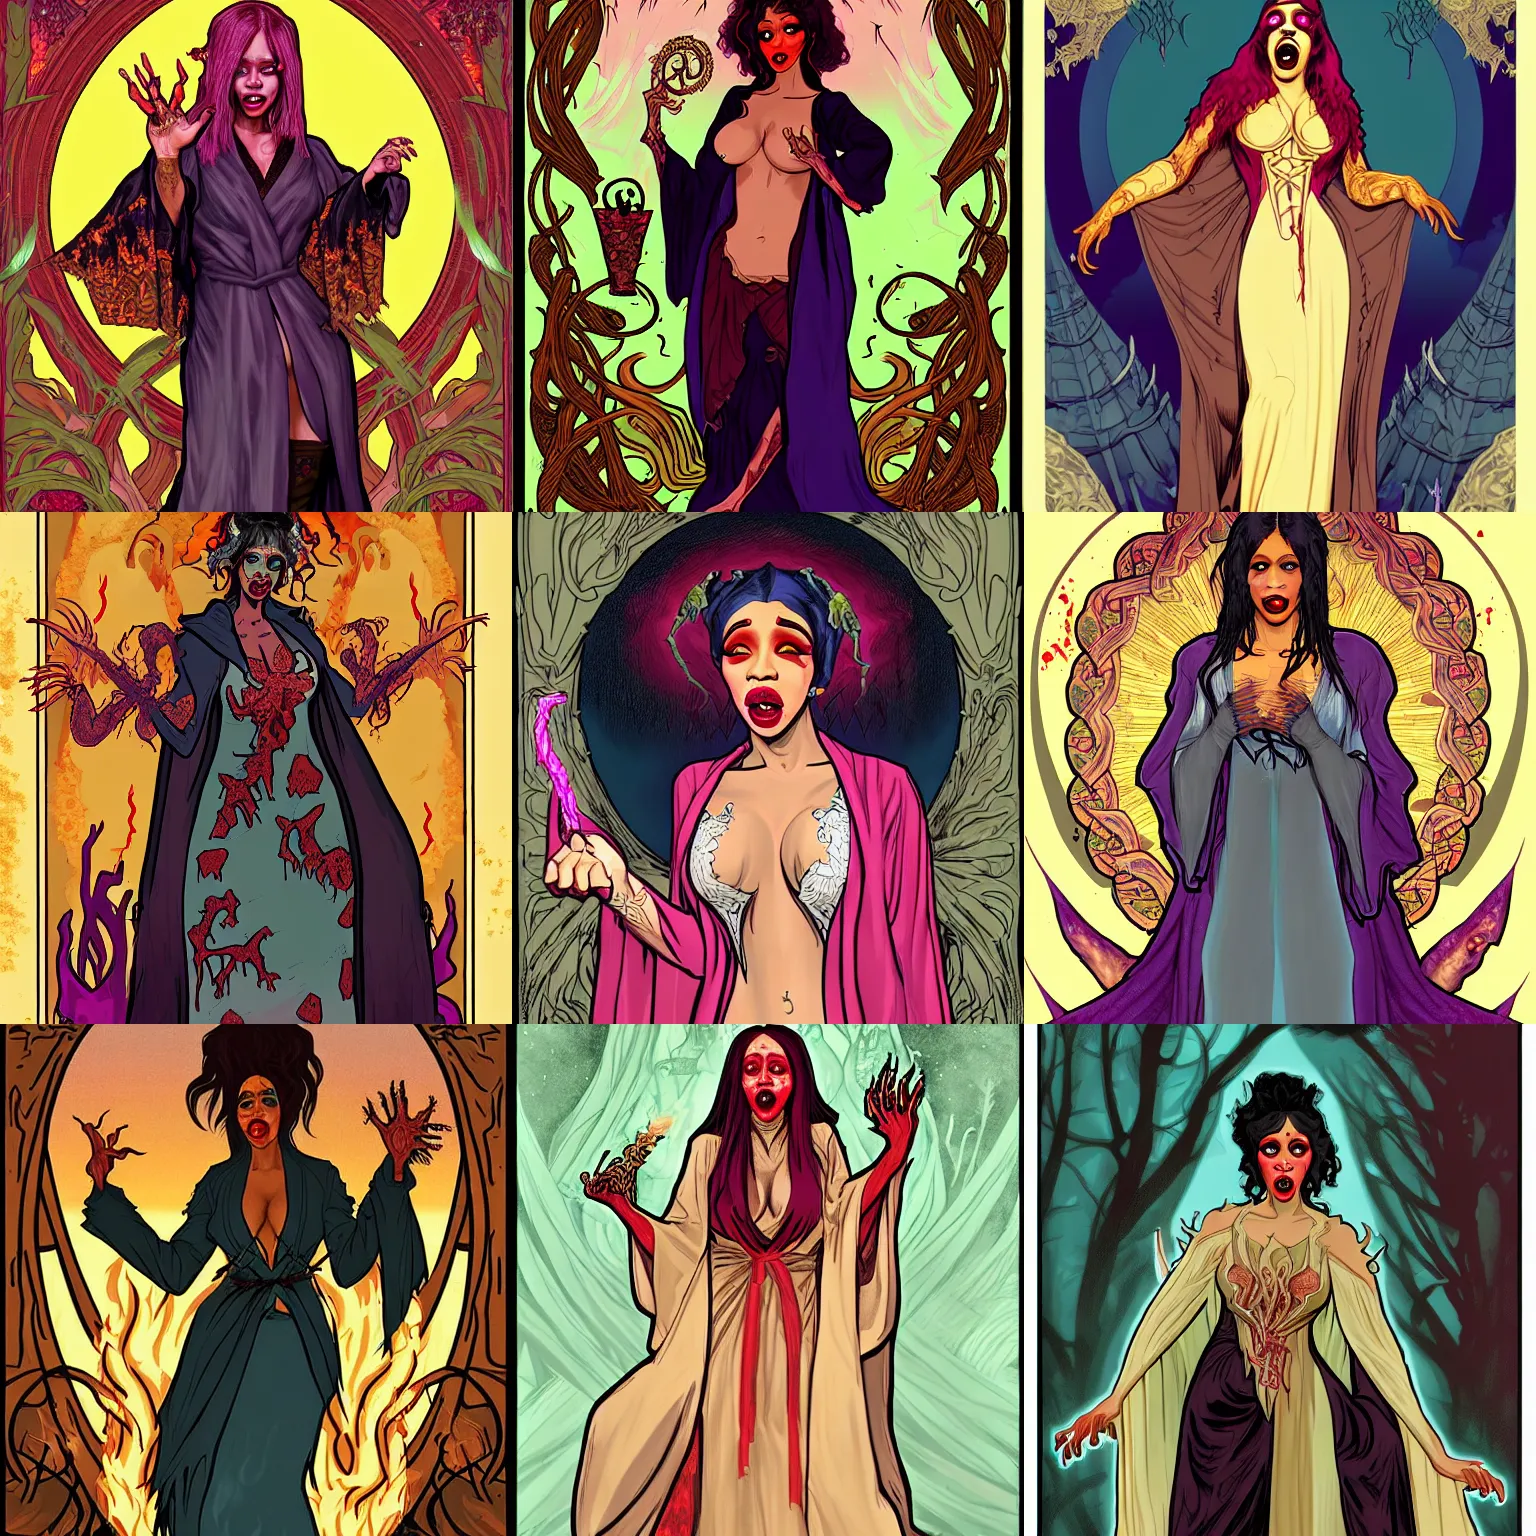 Prompt: zombie wizard cardi b casting a spell over a bonfire, inspired by plastination, beautiful face, wearing robes inspired by alphonse mucha. character art inspired by brom art